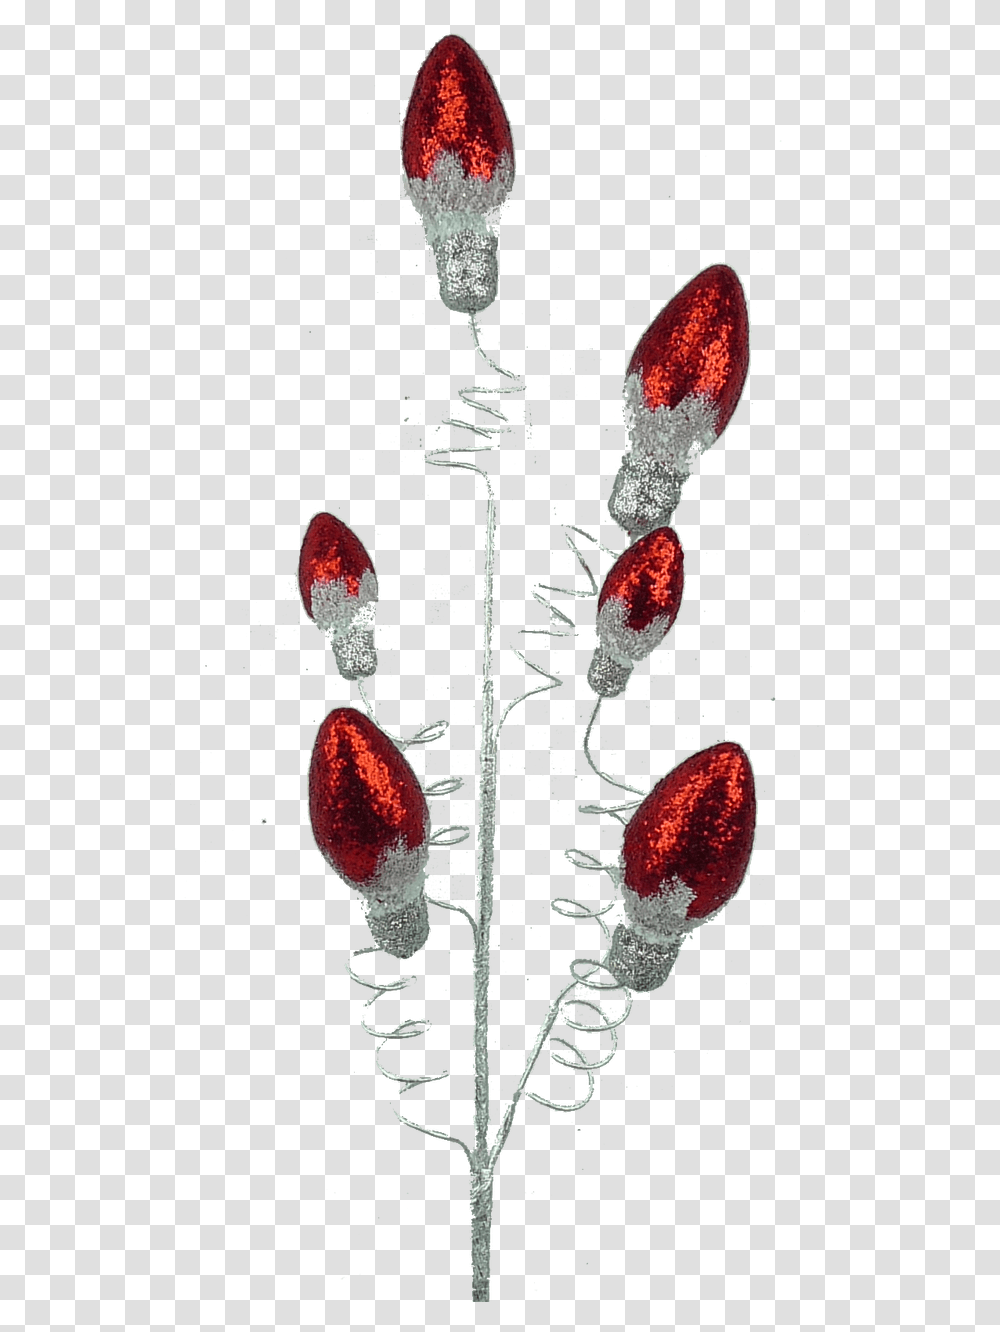 Small Red Light Bulb Spray Earrings, Plant, Flower Transparent Png